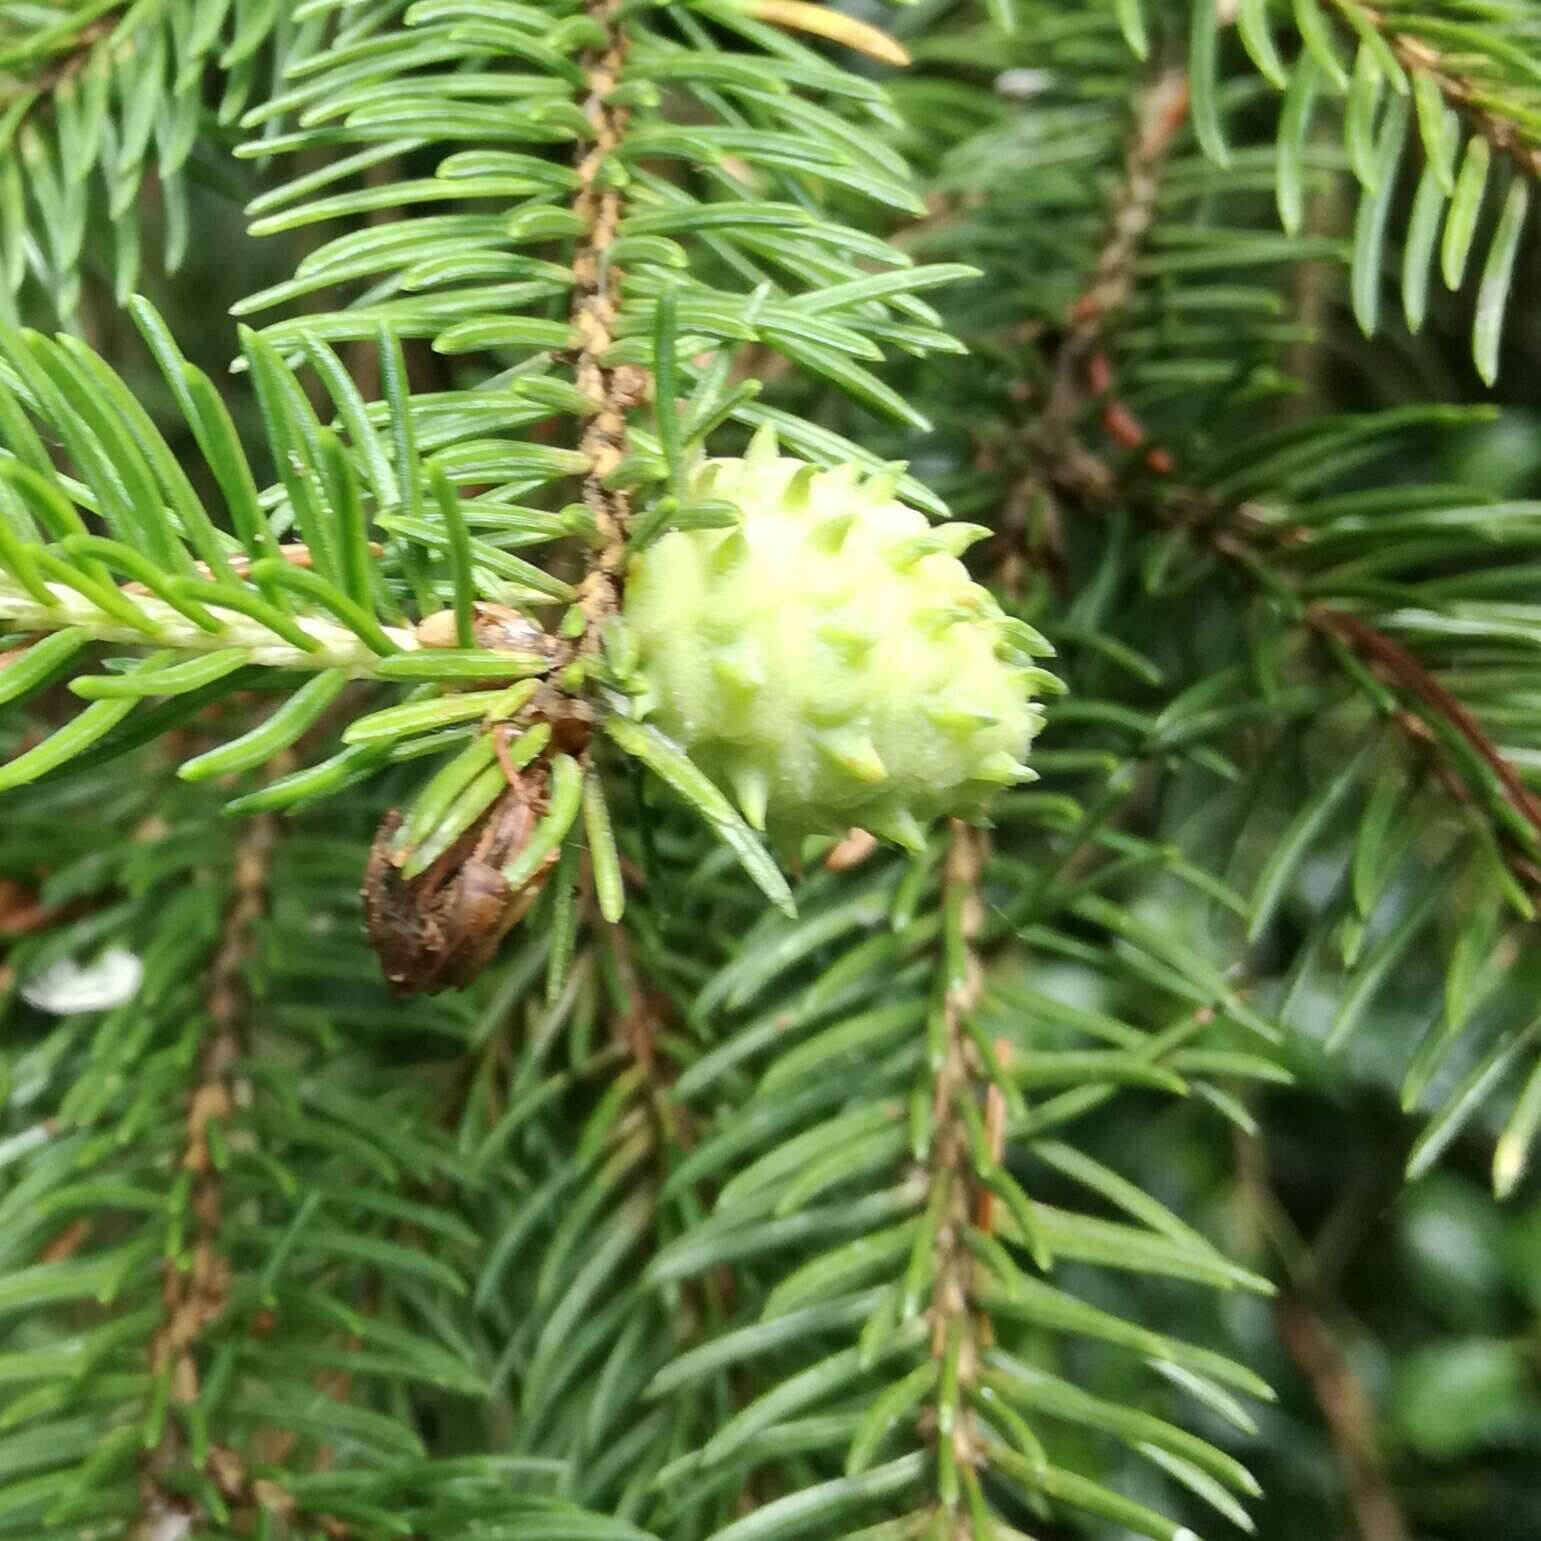 Image of Larch Adelges